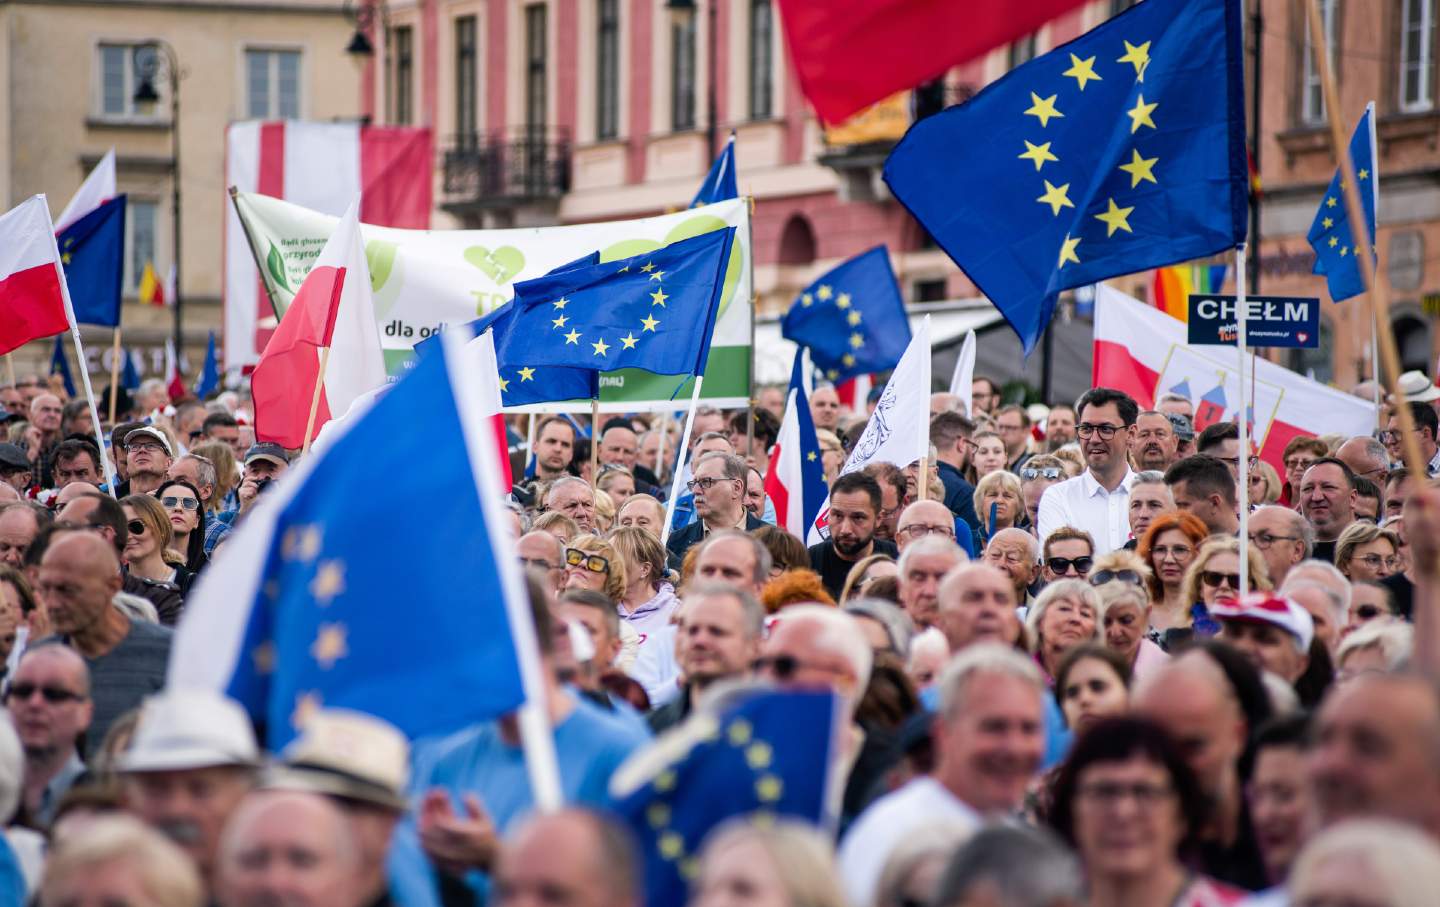 What Is at Stake as the European Union Swings Right?